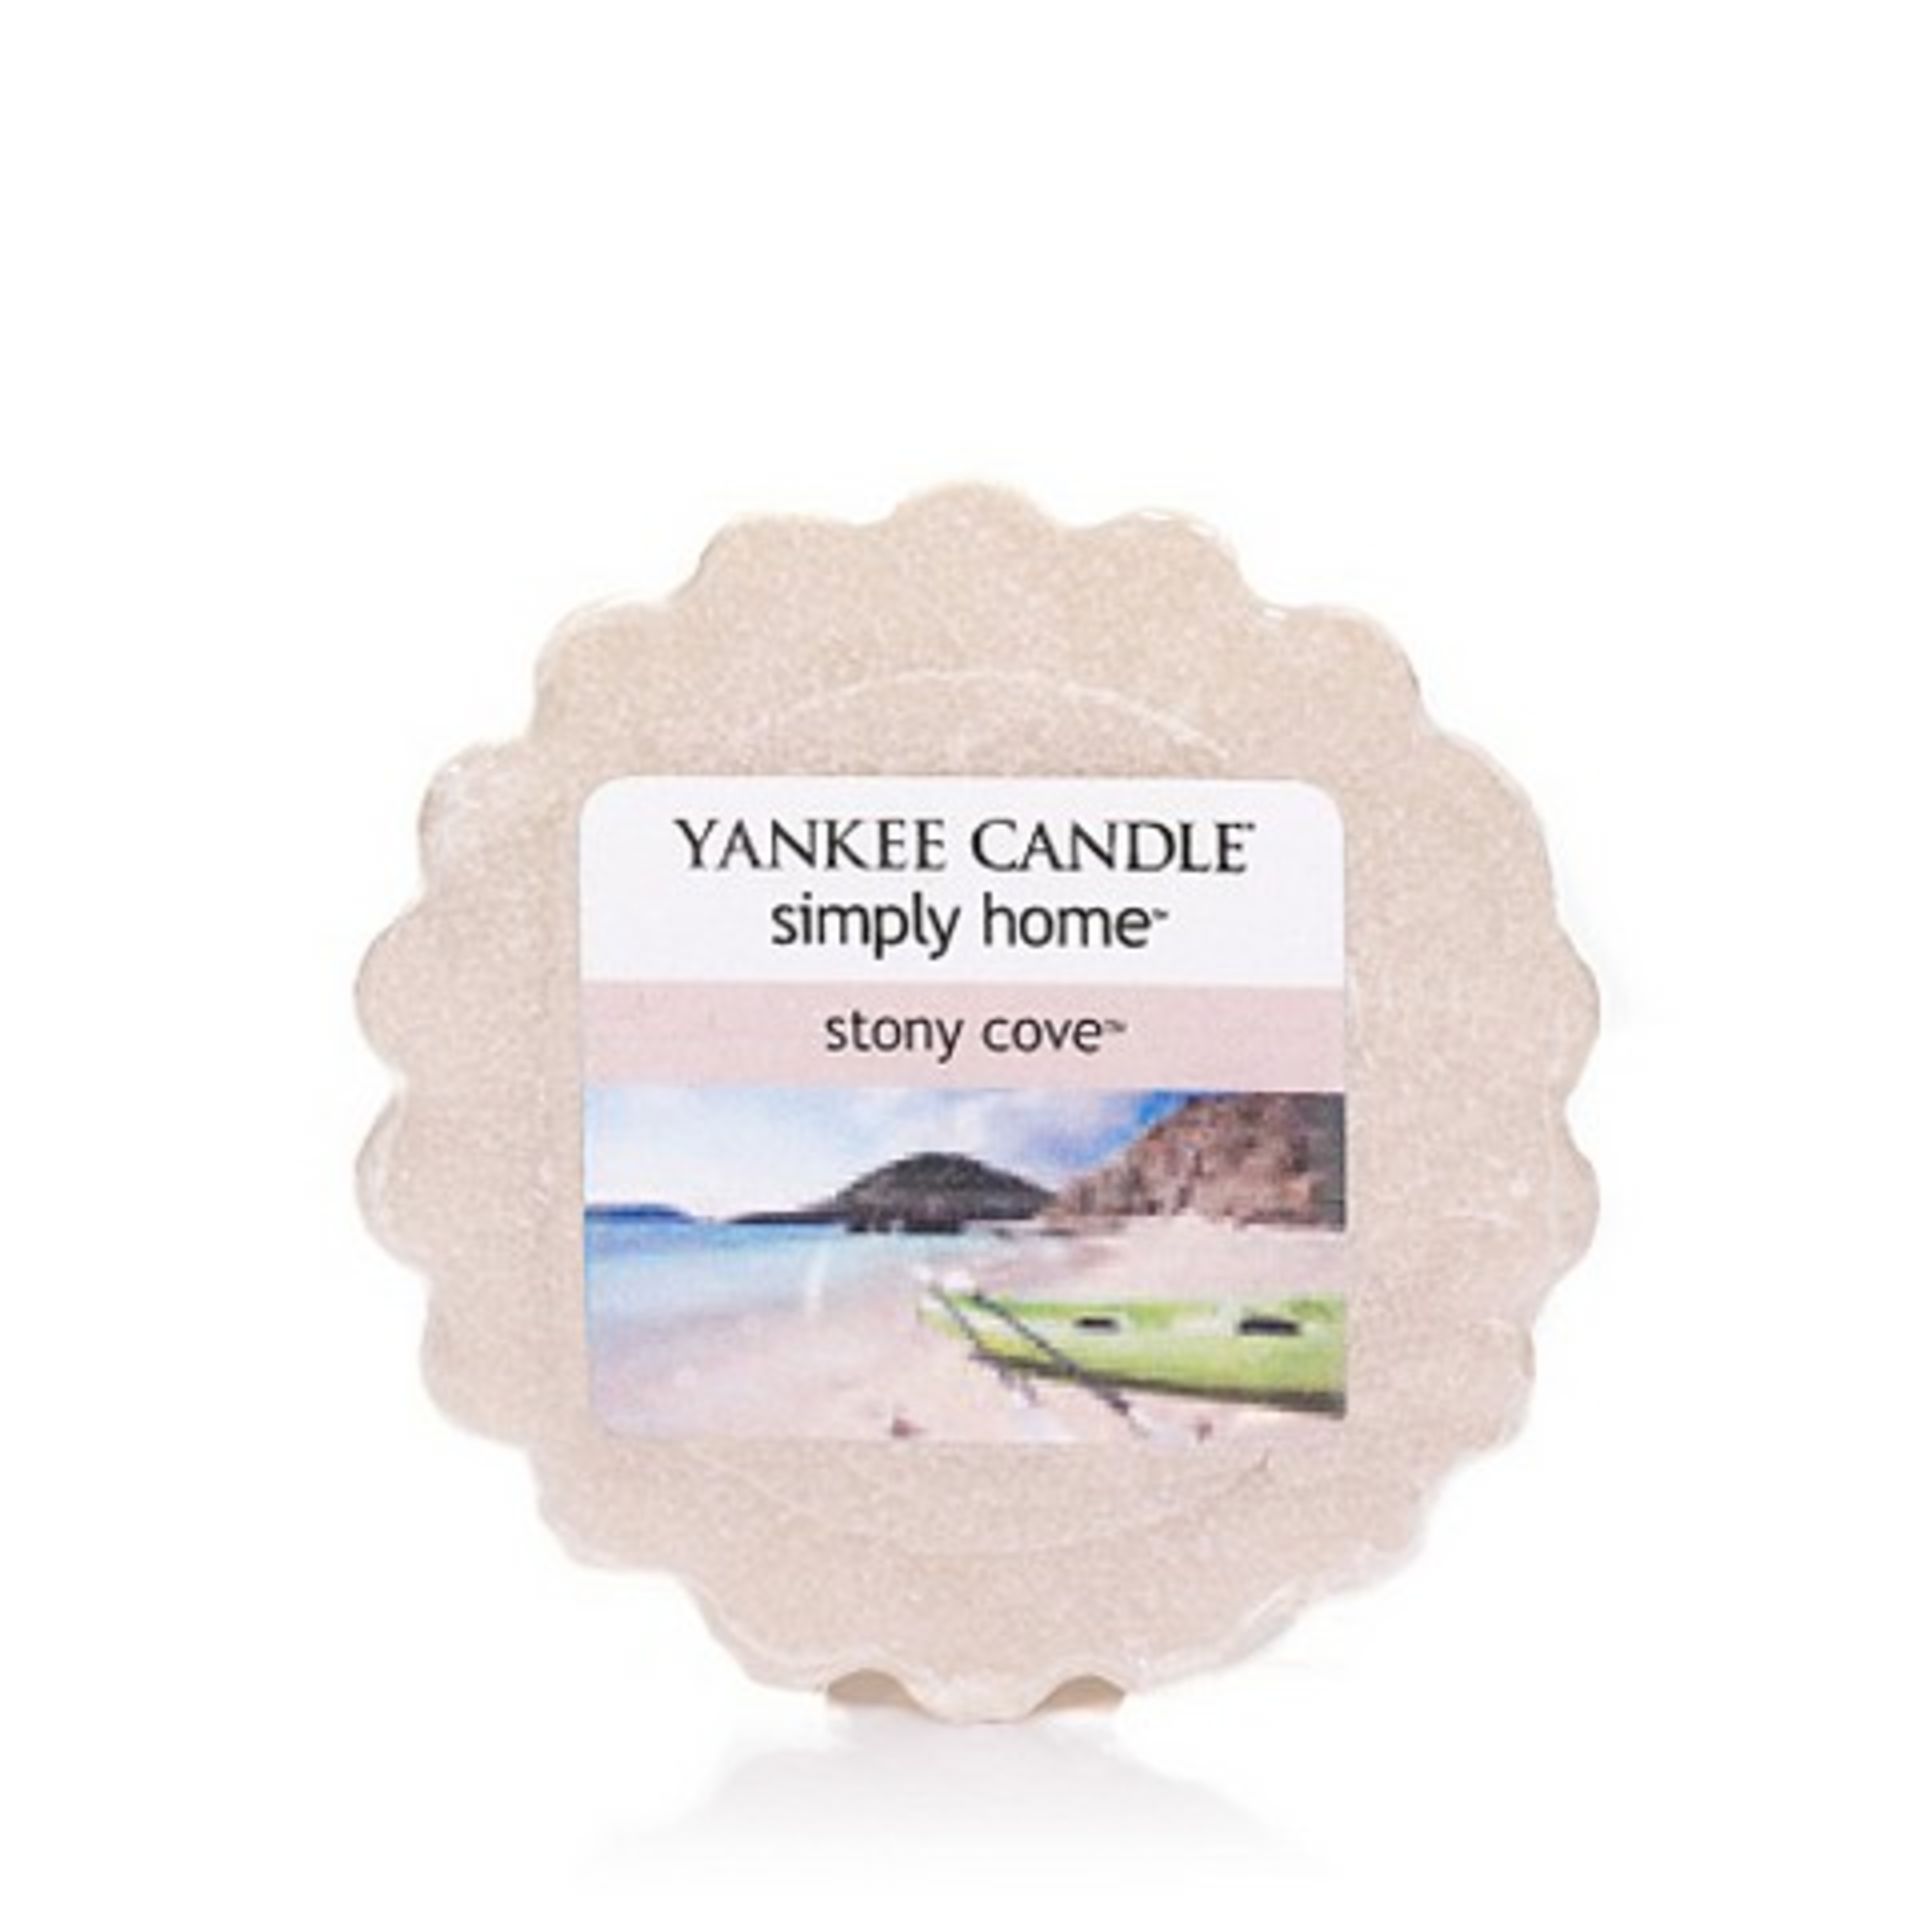 V Brand New 24 x Yankee Candle Tarts Stony Cove RRP: £35.76 (Yankee Candles) - Image 2 of 2